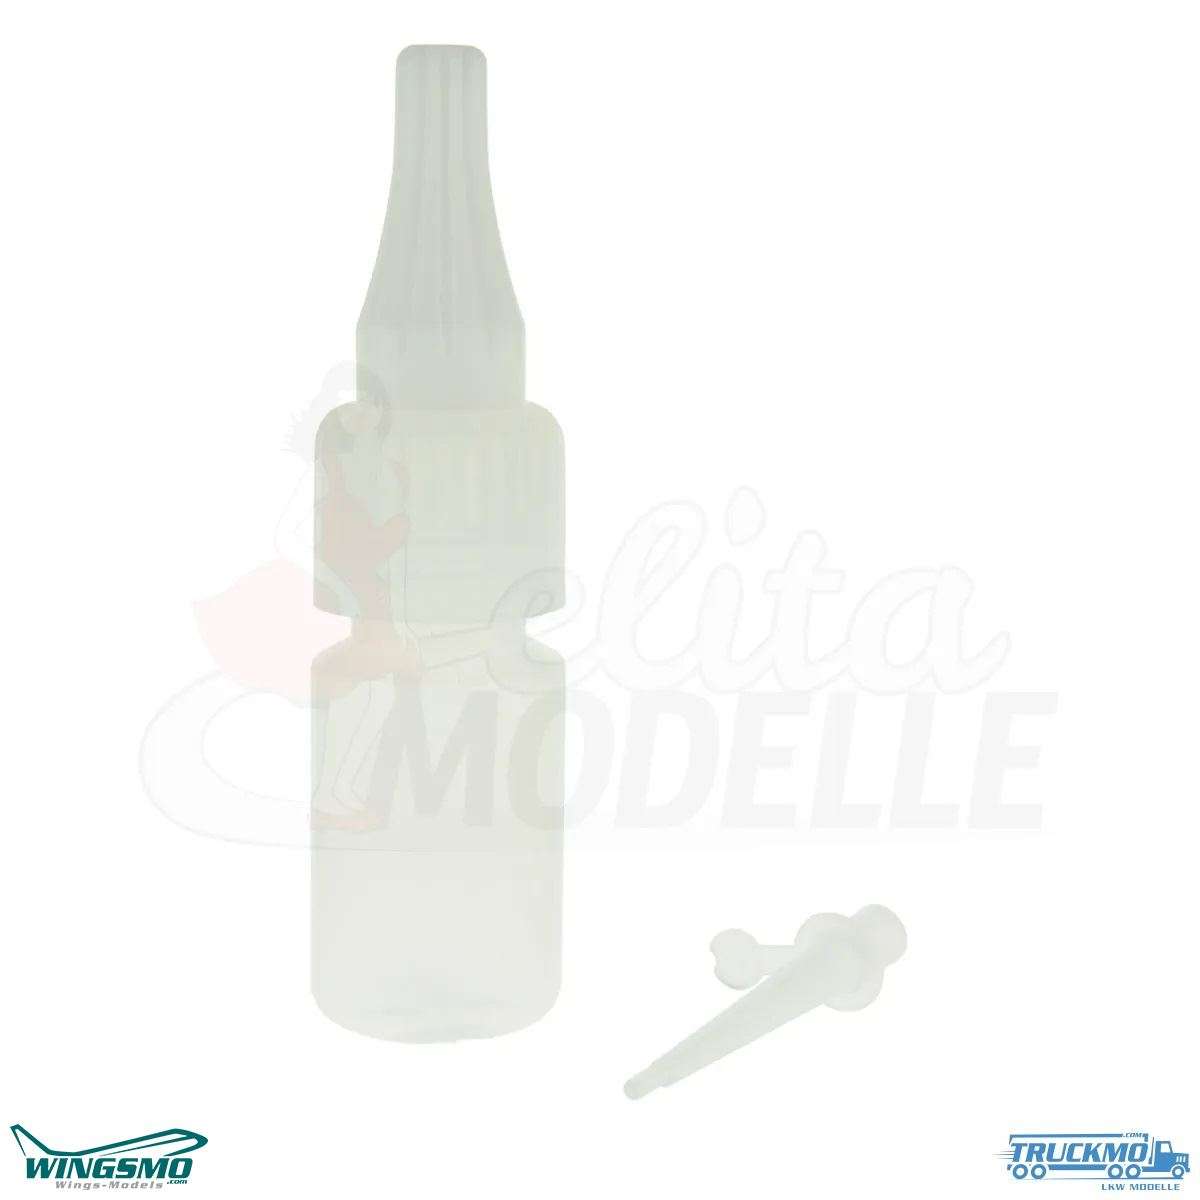 Elita Farben Accessories pipette bottle 10 ml with dosing cannula